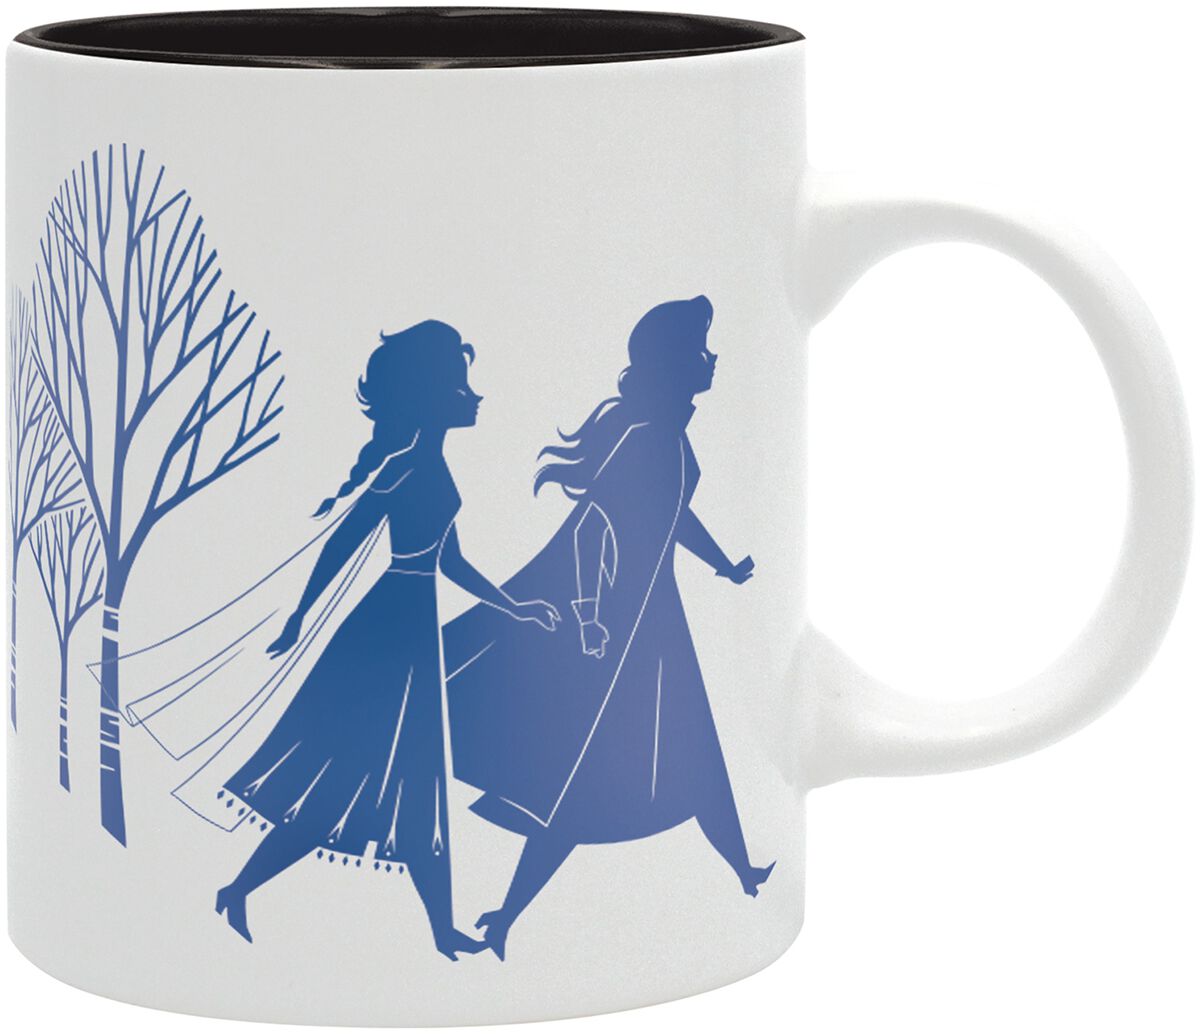 Frozen Silhouettes Cup white blue